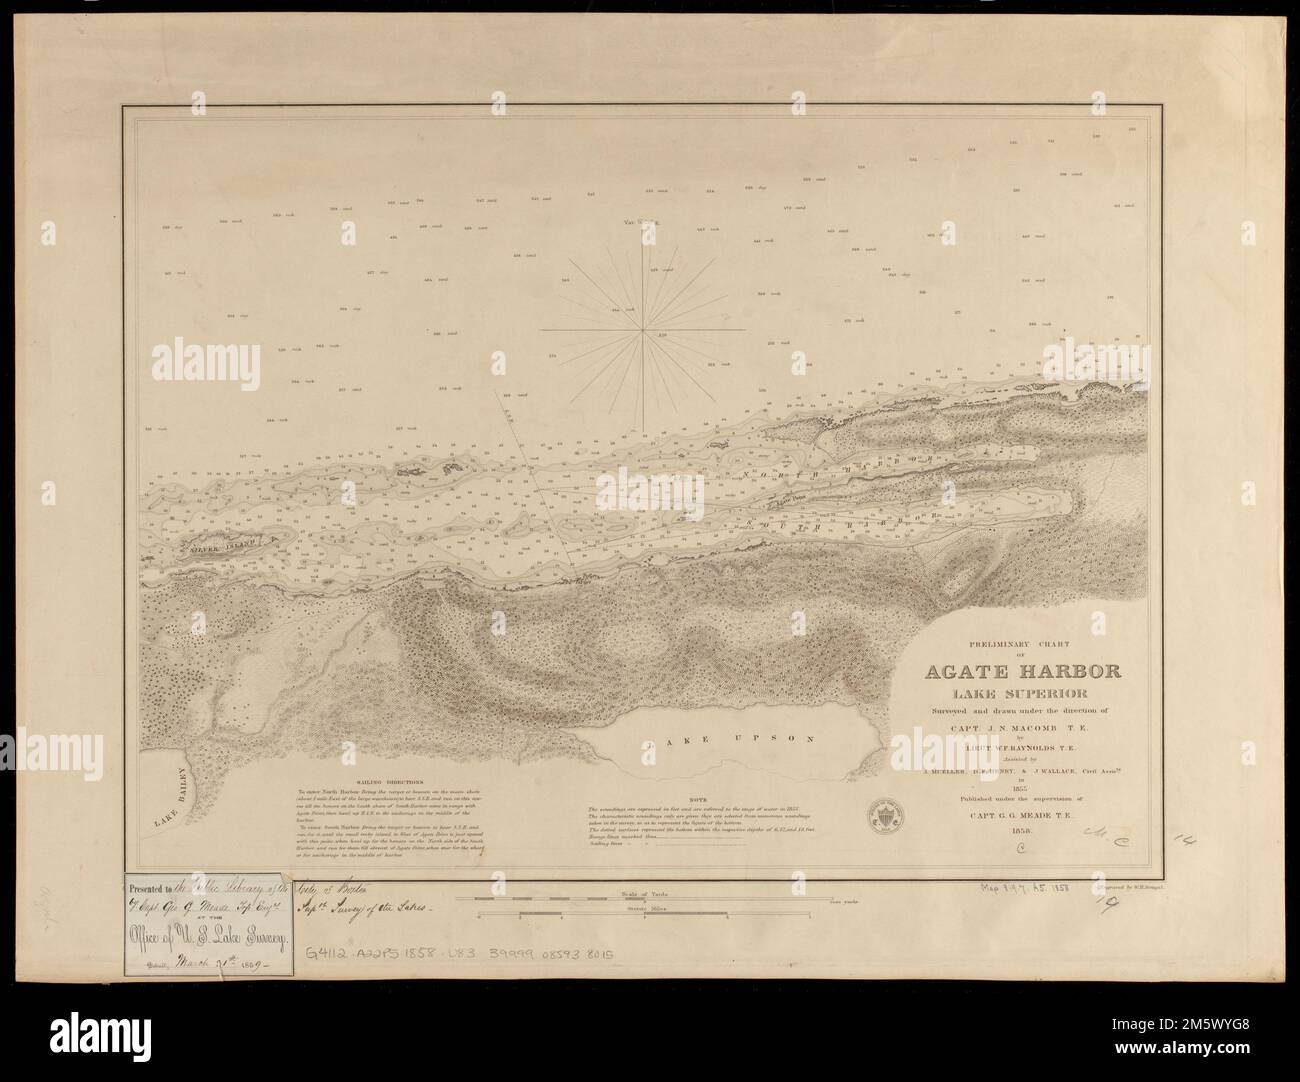 Preliminary chart of Agate Harbor, Lake Superior. Relief shown by hachures. Depths shown by soundings in feet. Includes sailing directions and note. On label pasted in lower left corner: Presented to Library of the Ills. End'l University, Detroit, Feb. 18, 1918, C.B. Comstock, Survey N. & N.W. Lakes... Agate Harbor, Lake Superior. Agate Harbor, Lake Superior, Michigan  , Keweenaw  ,county   , Agate Harbor  ,bay Stock Photo